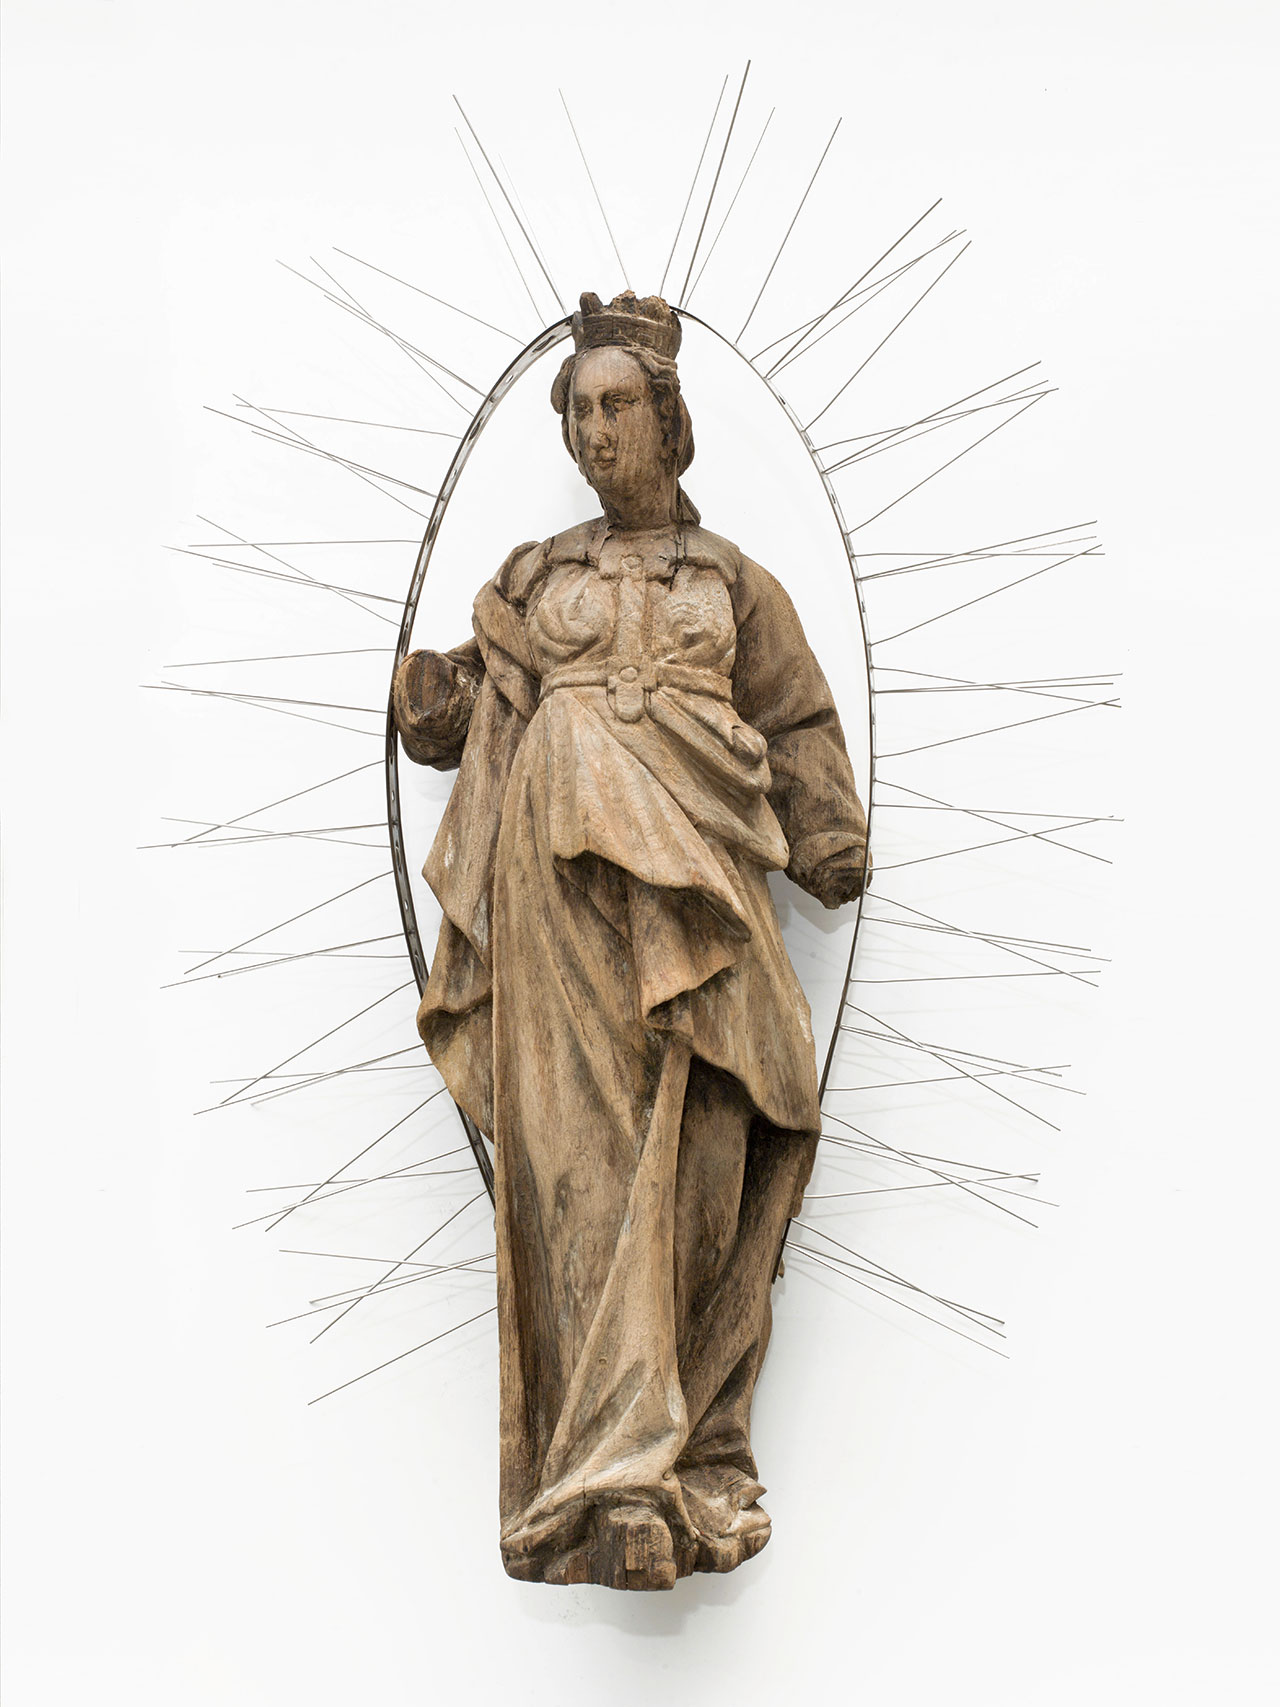 Kris Martin, Annunciata, 2016. Oakwood, metal. Private collection, Germany. Courtesy Kris Martin and König Galerie. Photo Roman März.
Artist's statement: A halo of pigeon spikes surrounds a 17th-century Madonna and seems to scare off the angels.